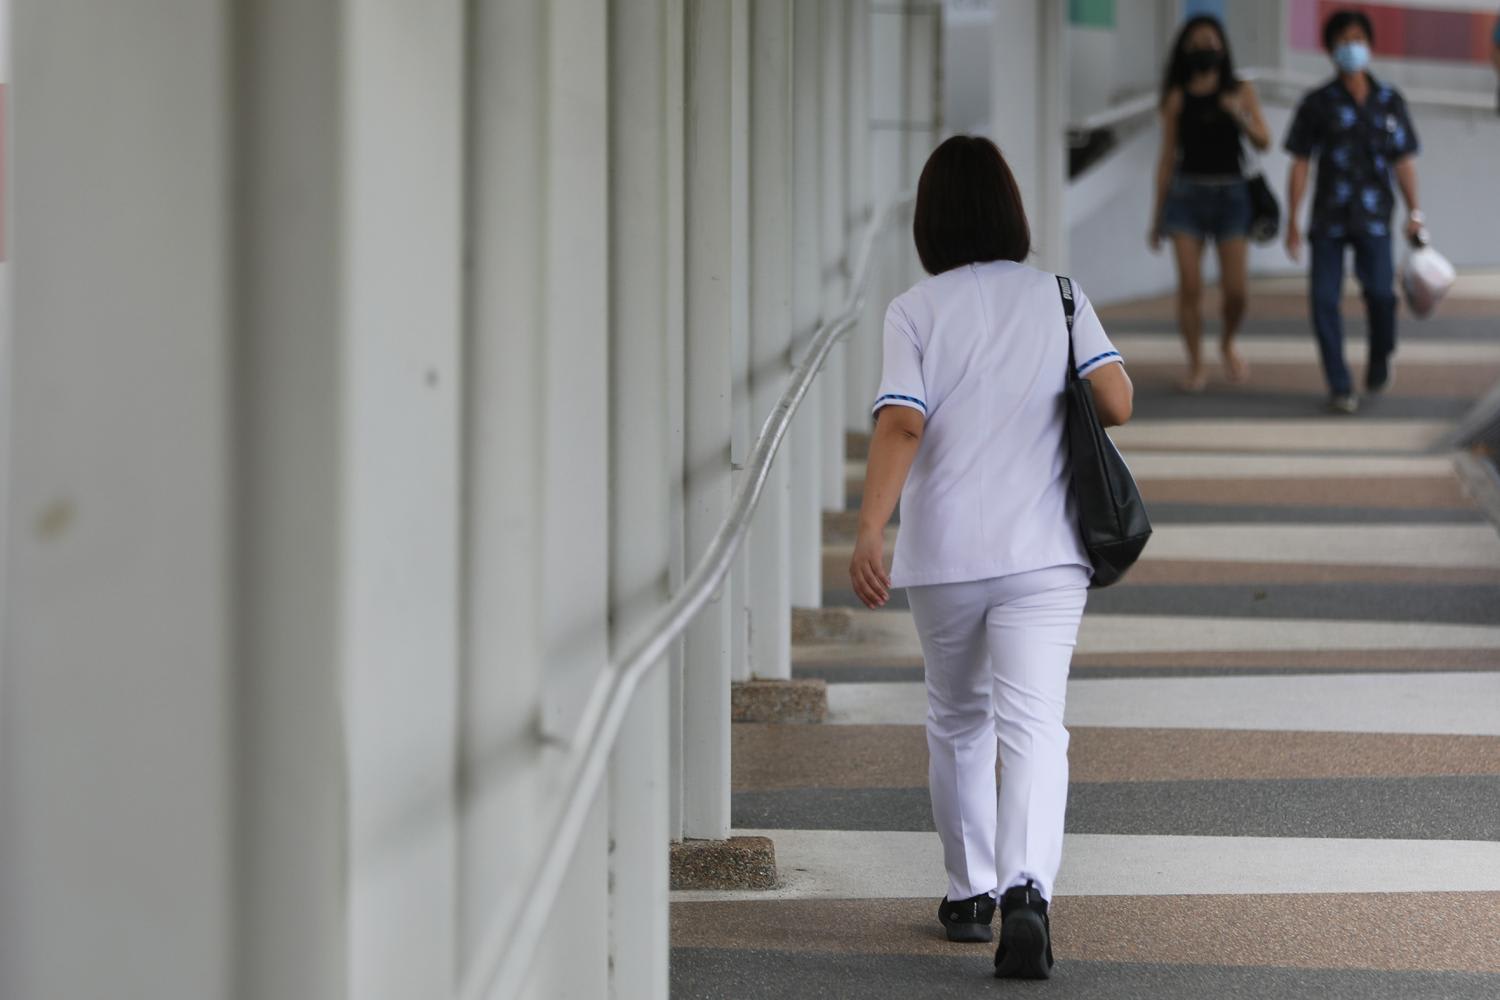 Among locals, the attrition was 7.4 per cent in 2012, up from 5.4 per cent the previous year. For foreign nurses, attrition more than doubled year on year to 14.8 per cent in 2021.